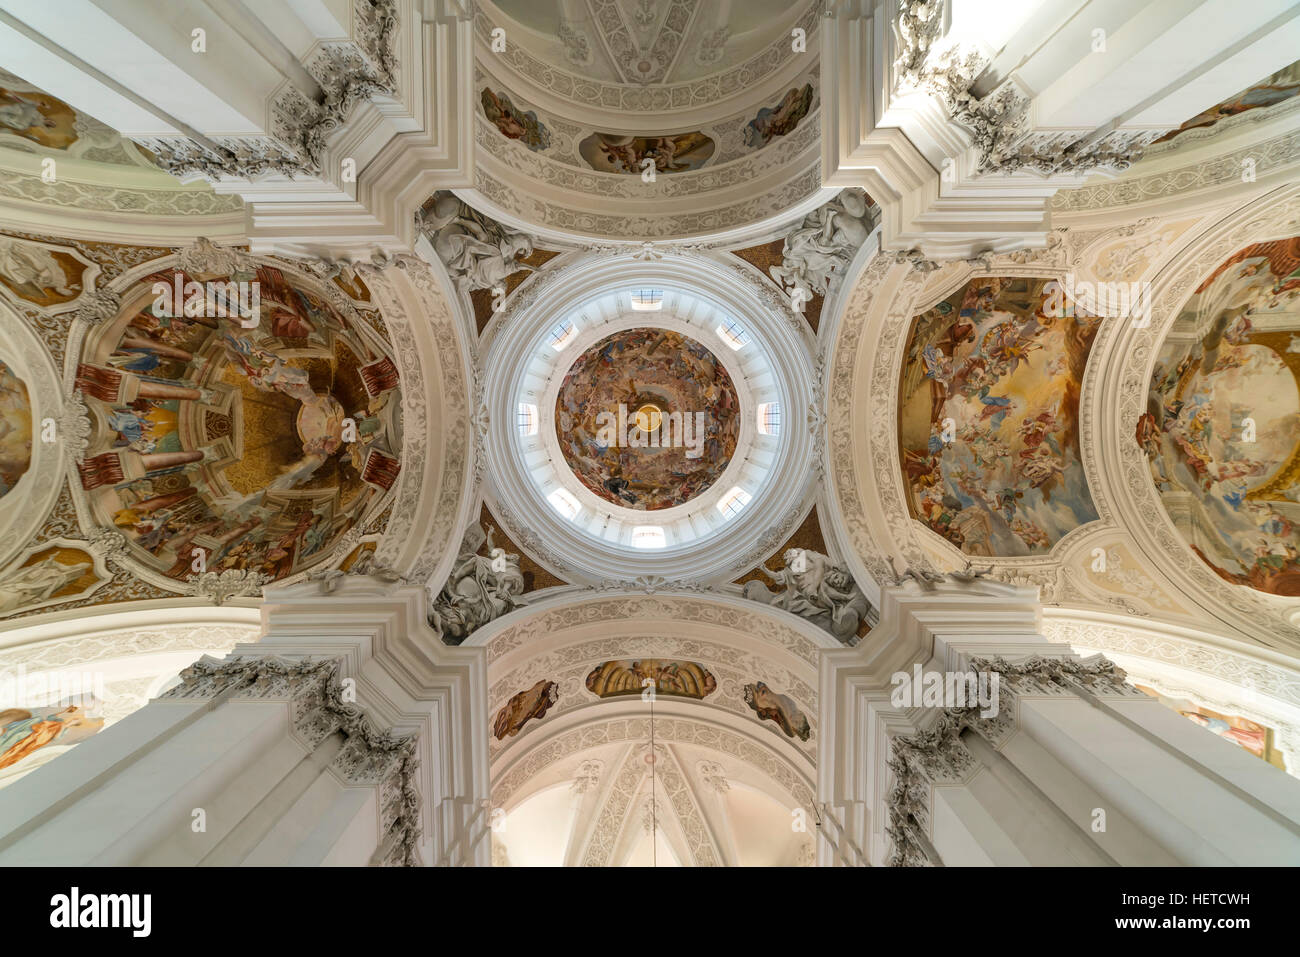 ceiling fresco of the Abbey Church of St. Martin and Oswald, Weingarten, Ravensburg district, Baden-Württemberg, Germany Stock Photo